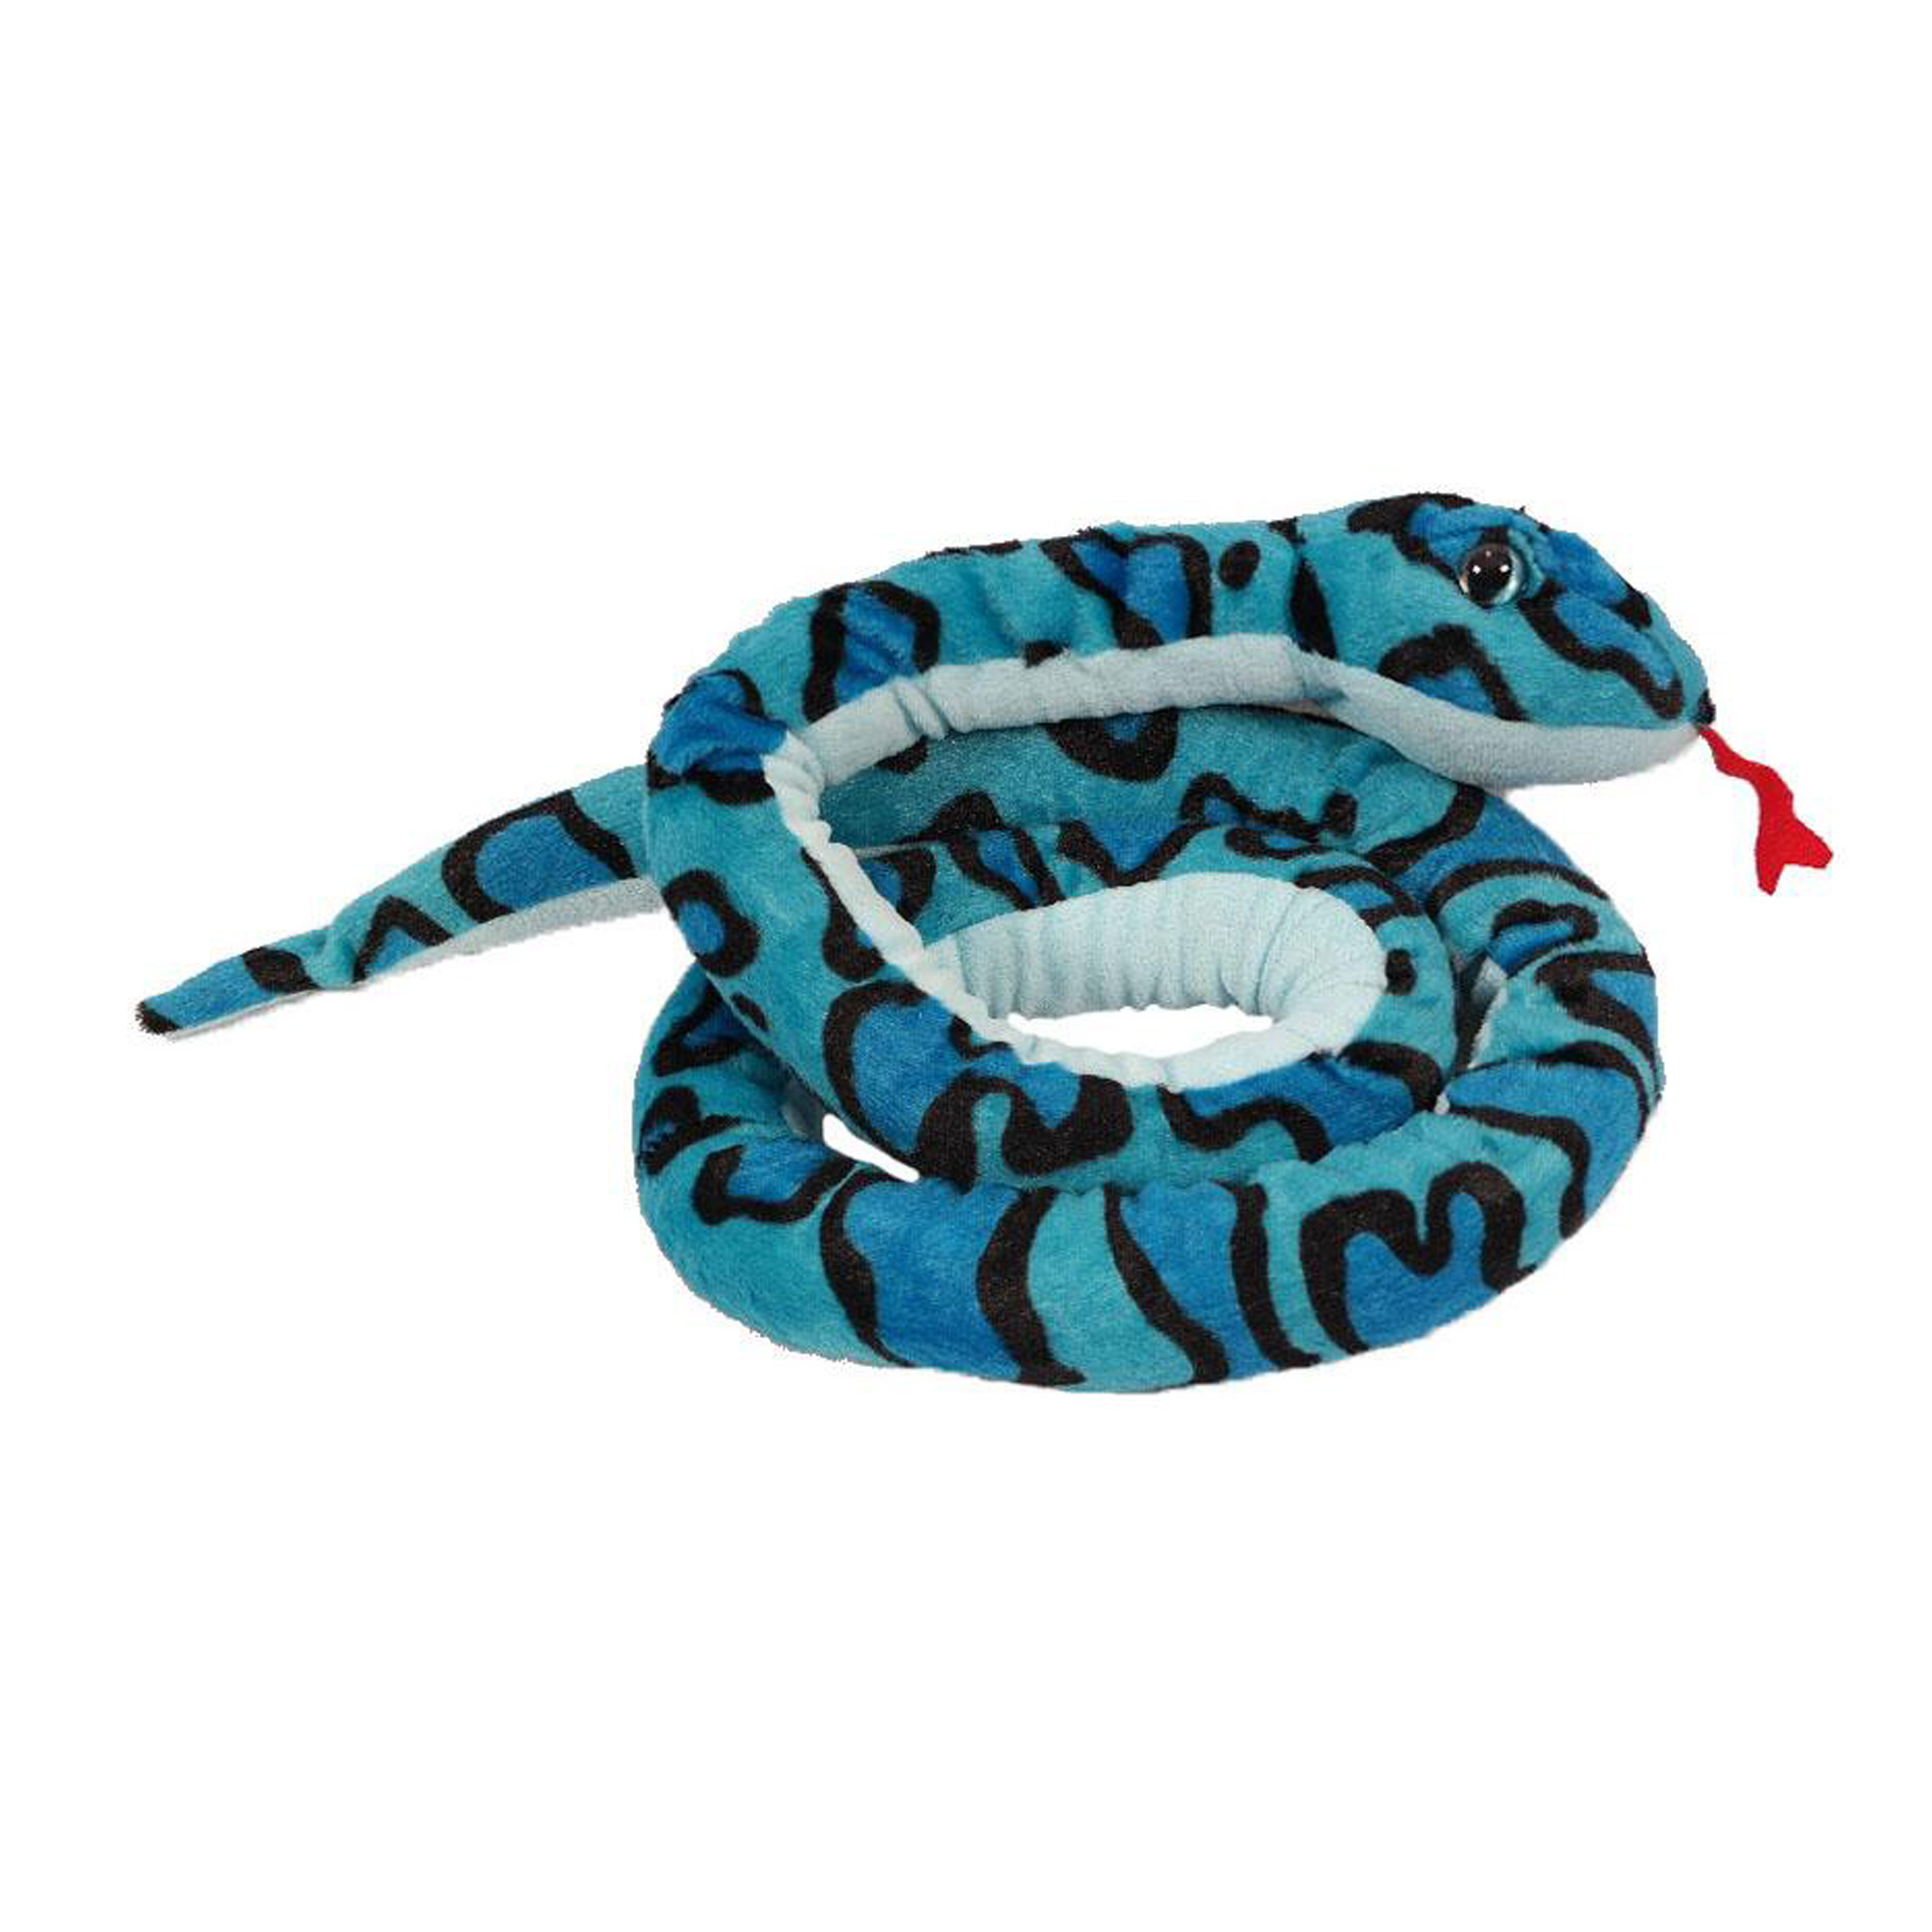 PIA Soft Toys Pia Toys Knuffeldier Boomslang - zachte pluche stof - blauw - kwaliteit knuffels - 250 cm -